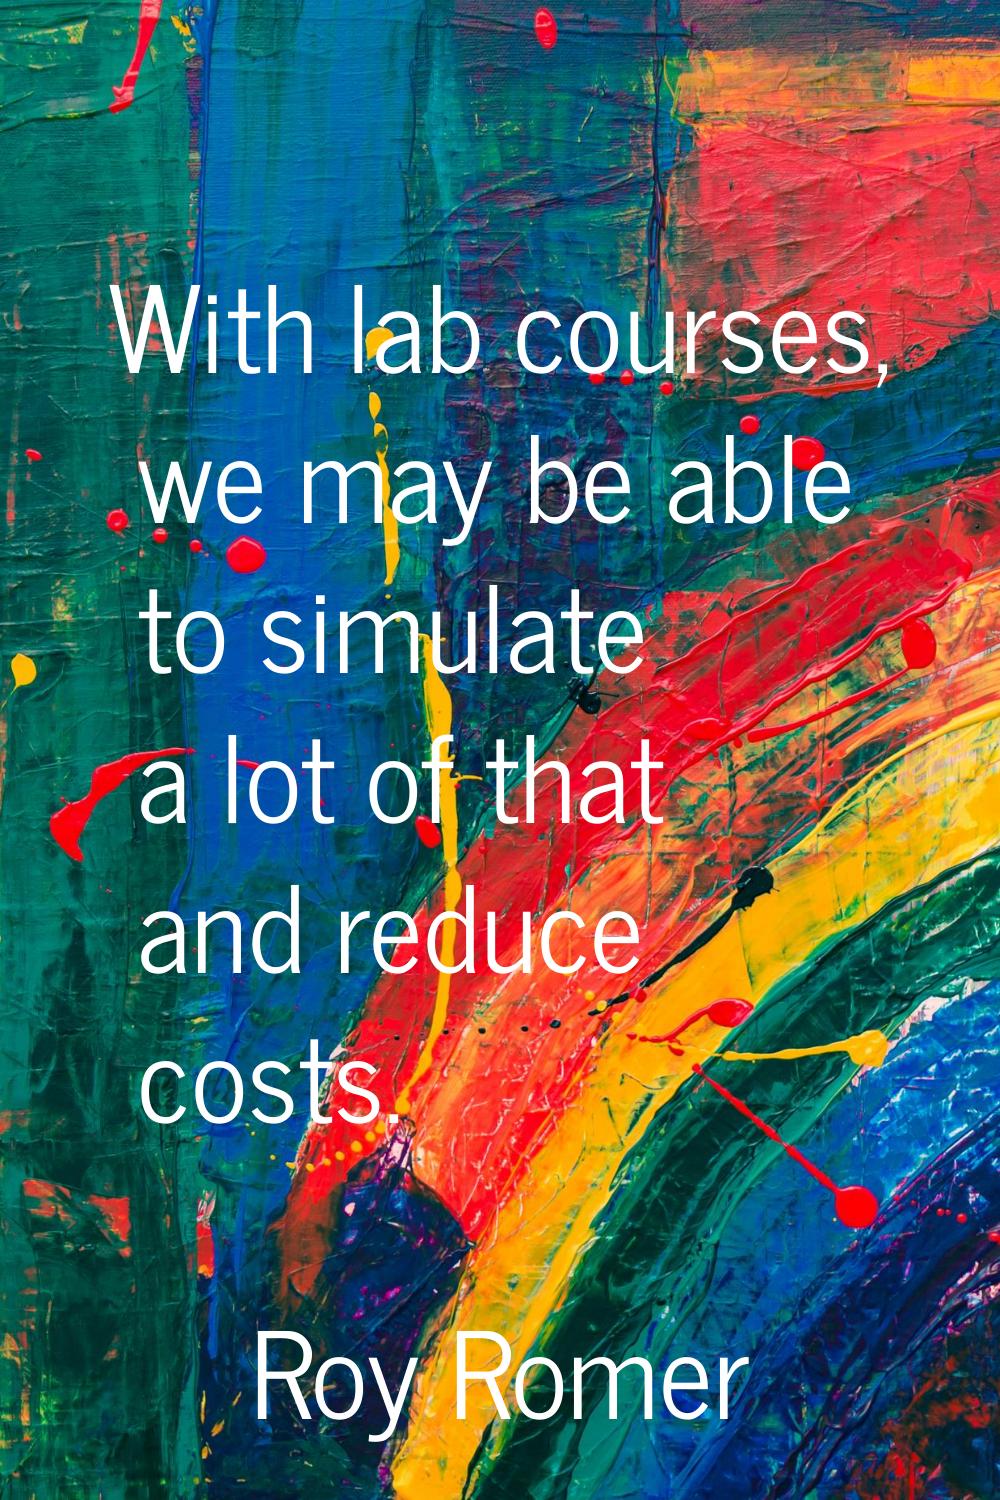 With lab courses, we may be able to simulate a lot of that and reduce costs.